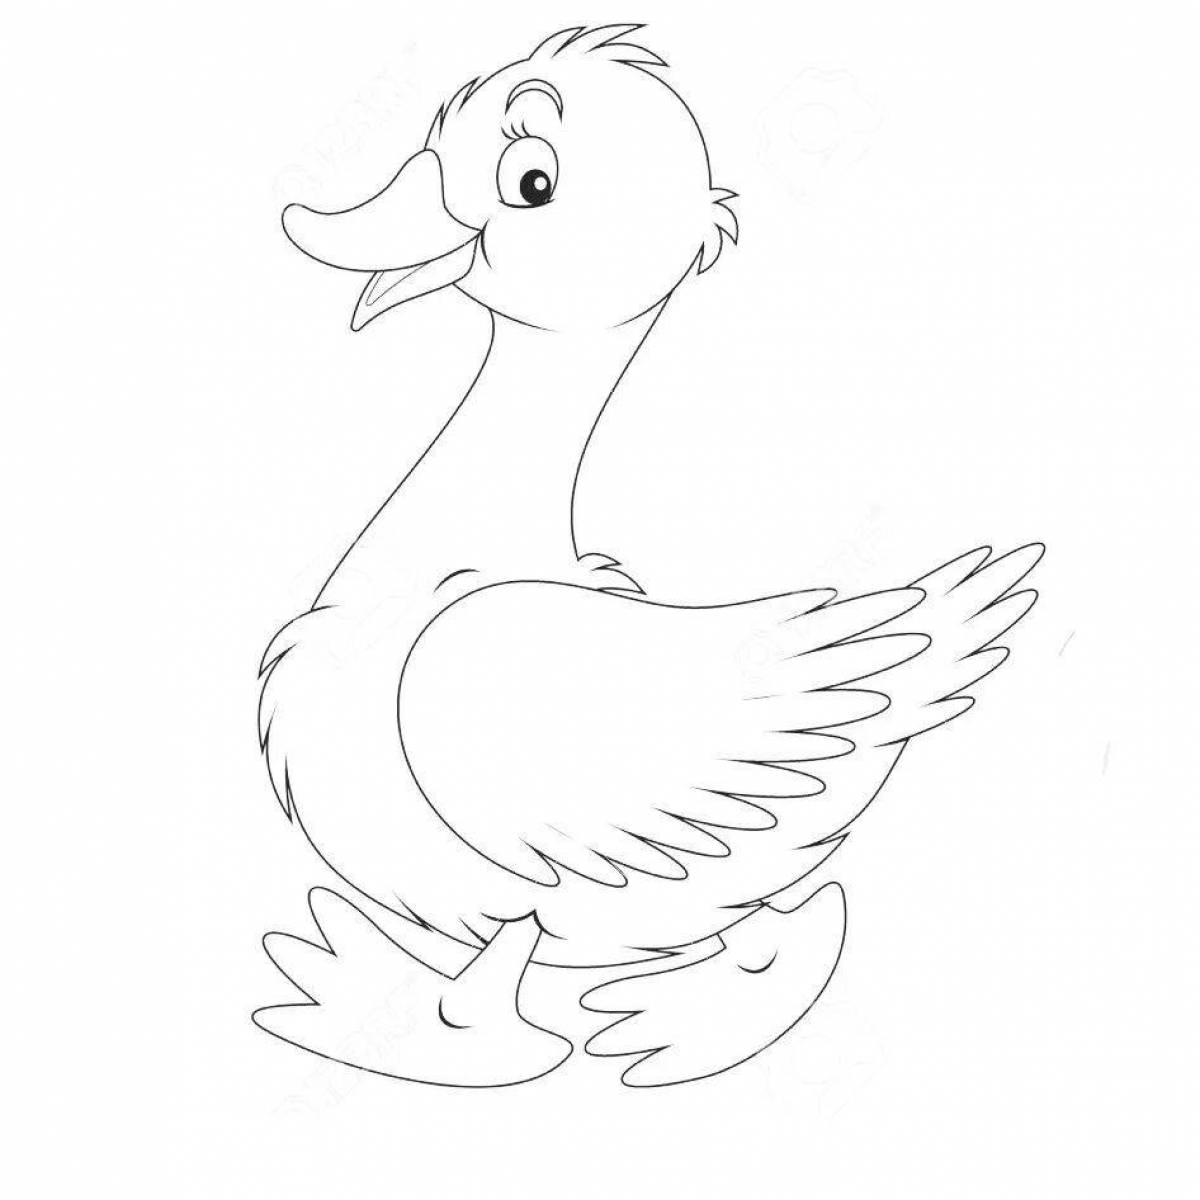 Fun goose coloring book for 3-4 year olds